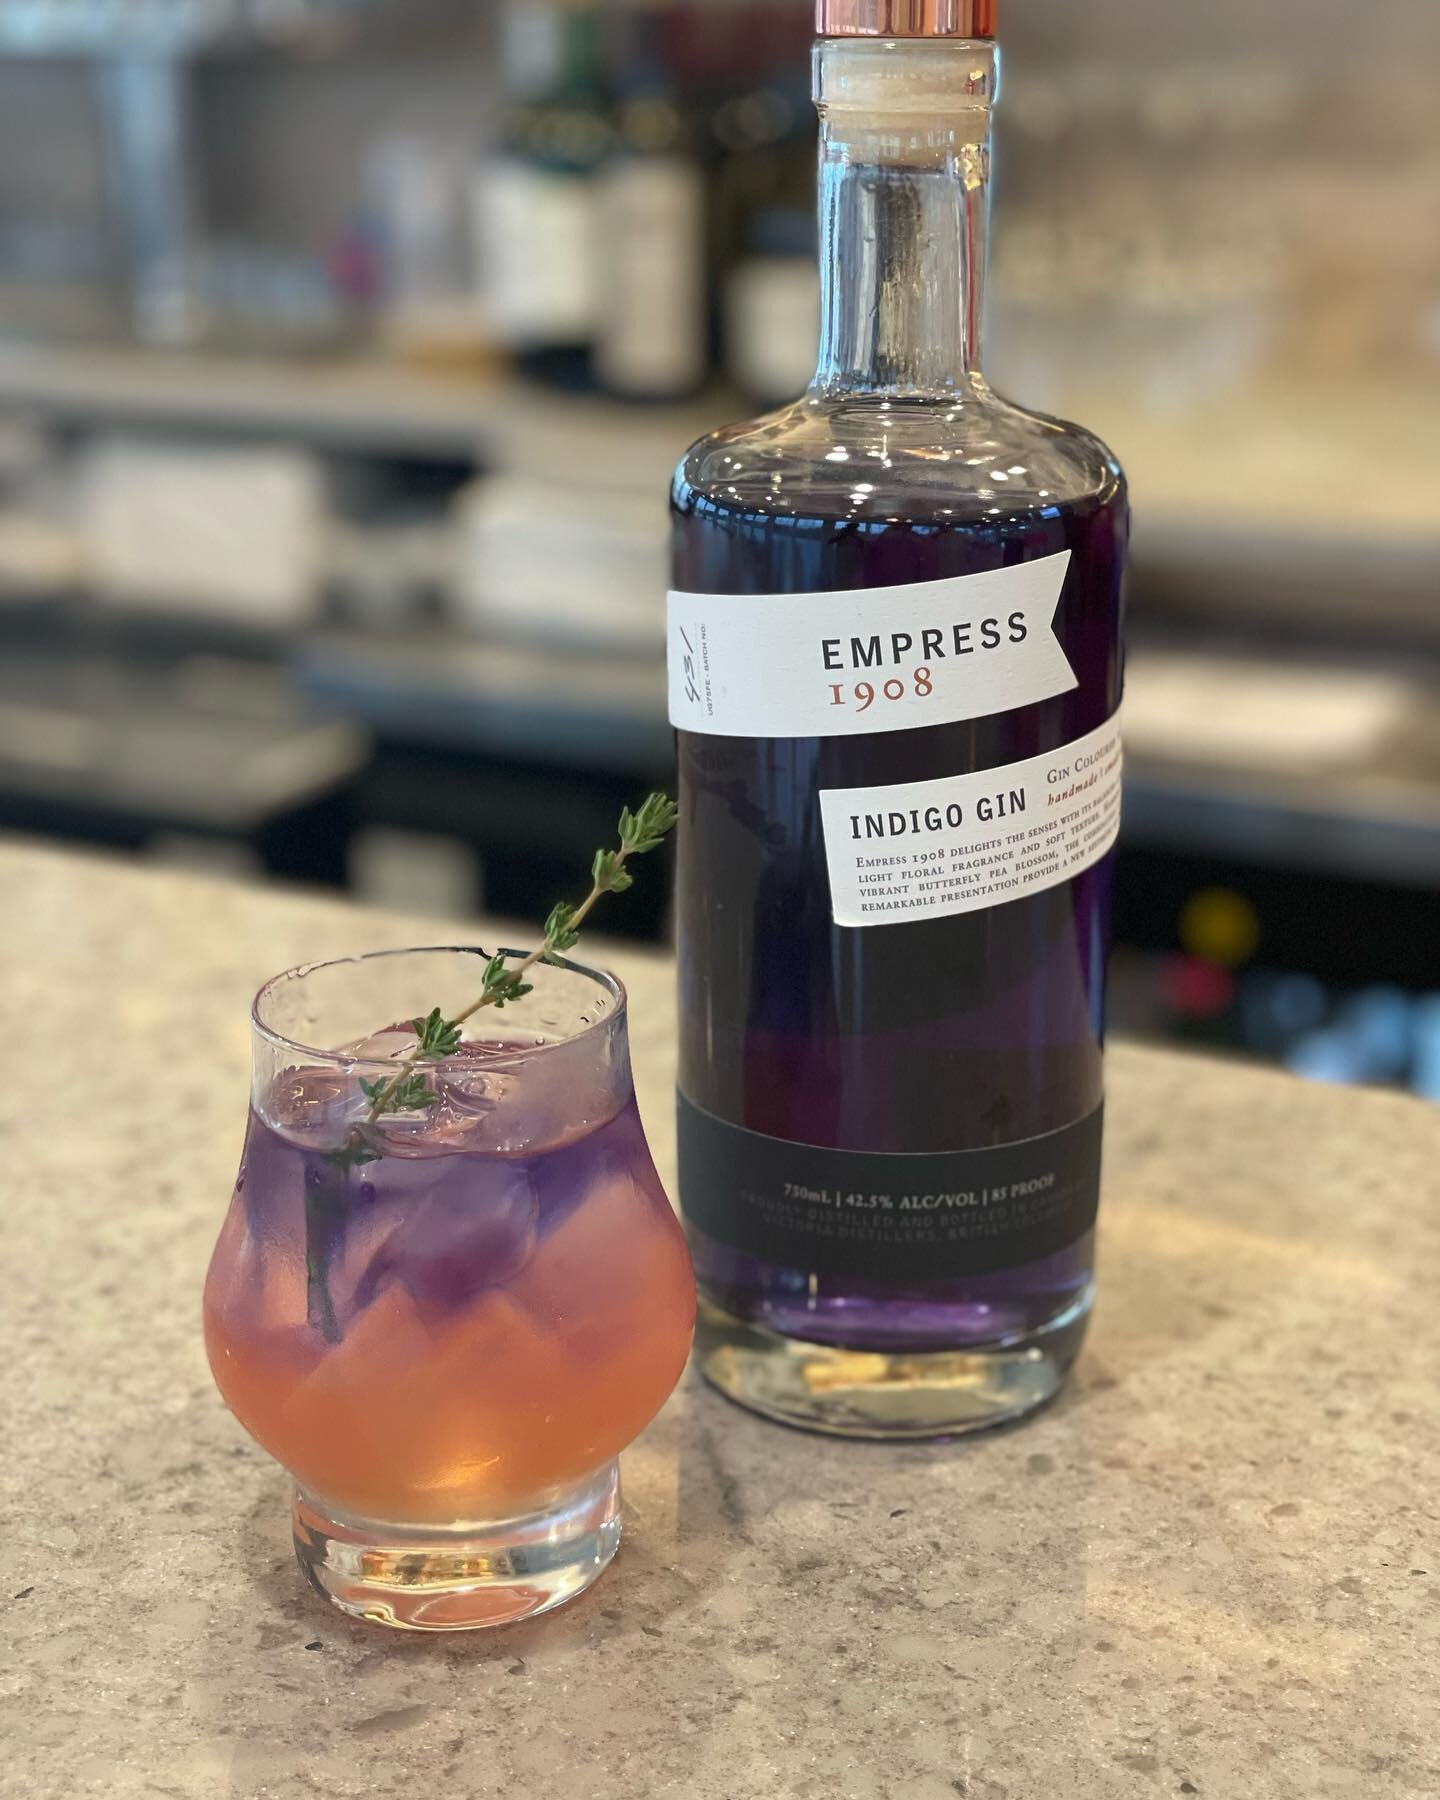 It may not feel like Summer Time today but it is surely feeling like &rdquo;Empress Thyme.&rdquo; Meredith and Jamesson are excited about this tasty cocktail! 
.
.
.
.
.
Empress Gin, thyme infused simple syrup &amp; grapefruit juice